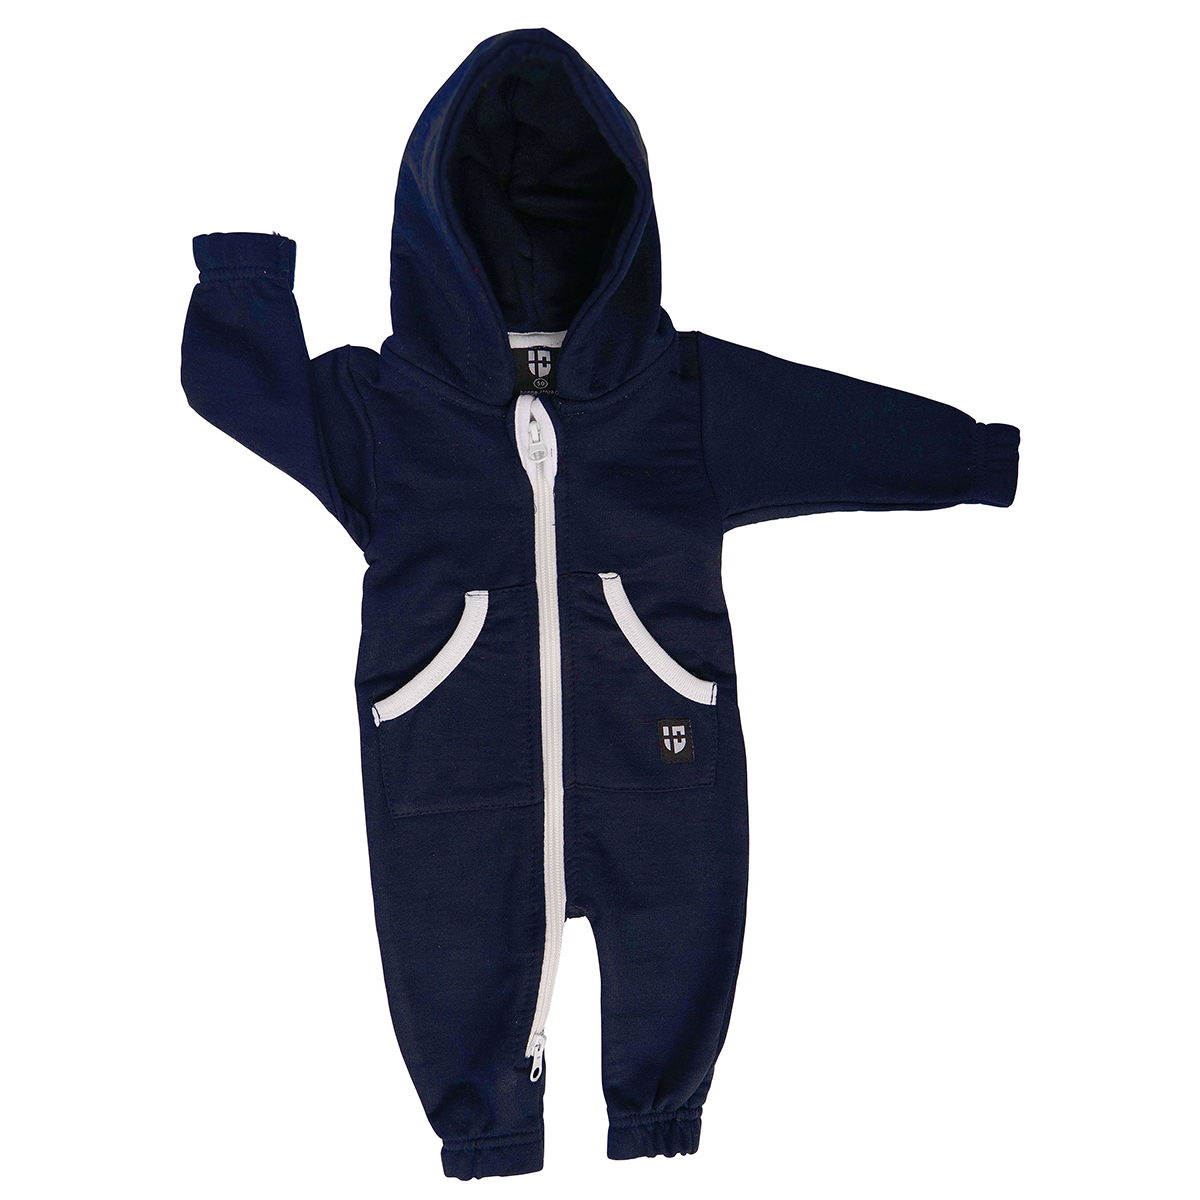 Gennadi Hoppe Baby Jumpsuit - Overall